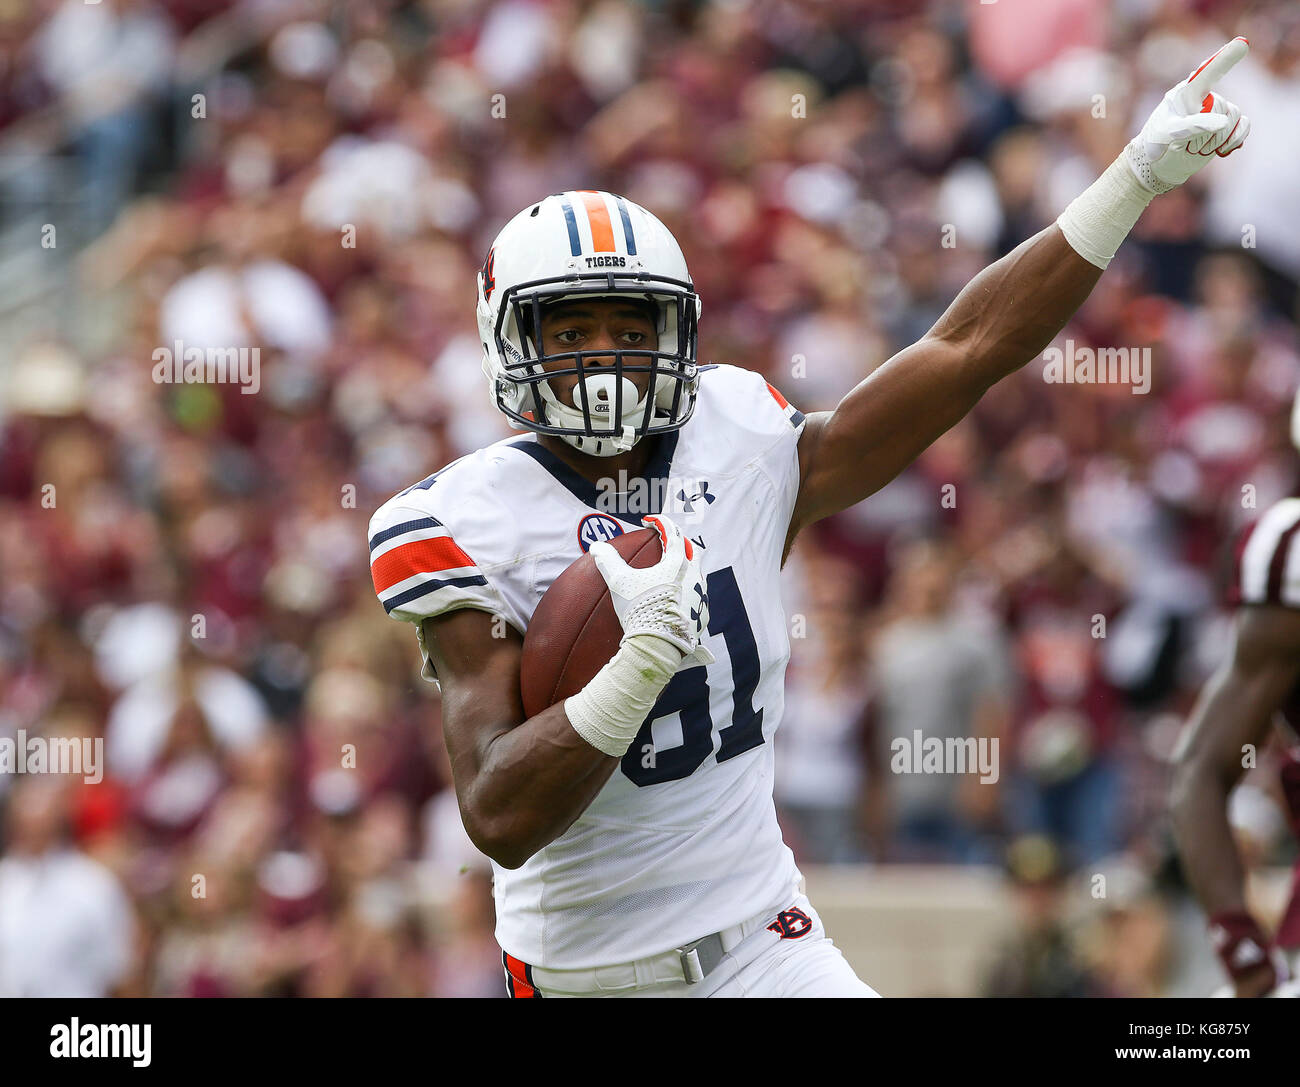 November 4, 2017: Auburn Tigers wide receiver Darius Slayton (81) celebrates after catching a 53 yard touchdown pass in the second quarter during the NCAA football game between the Auburn Tigers and the Texas A&M Aggies at Kyle Field in College Station, TX; John Glaser/CSM. Stock Photo